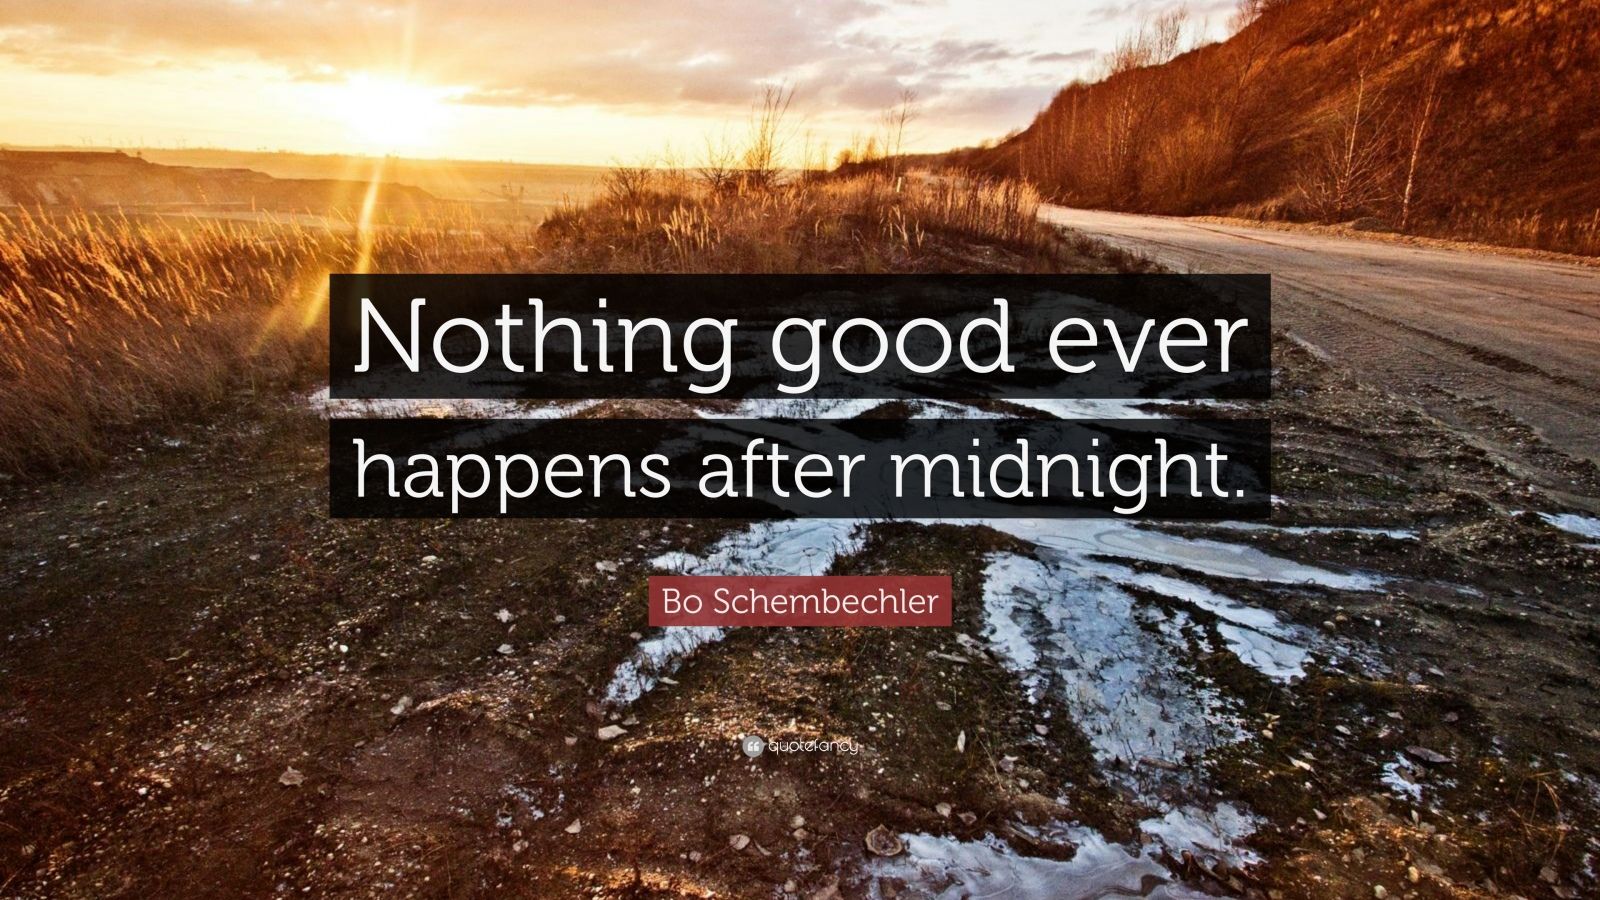 Bo Schembechler Quote: “Nothing good ever happens after midnight.” (7 ...